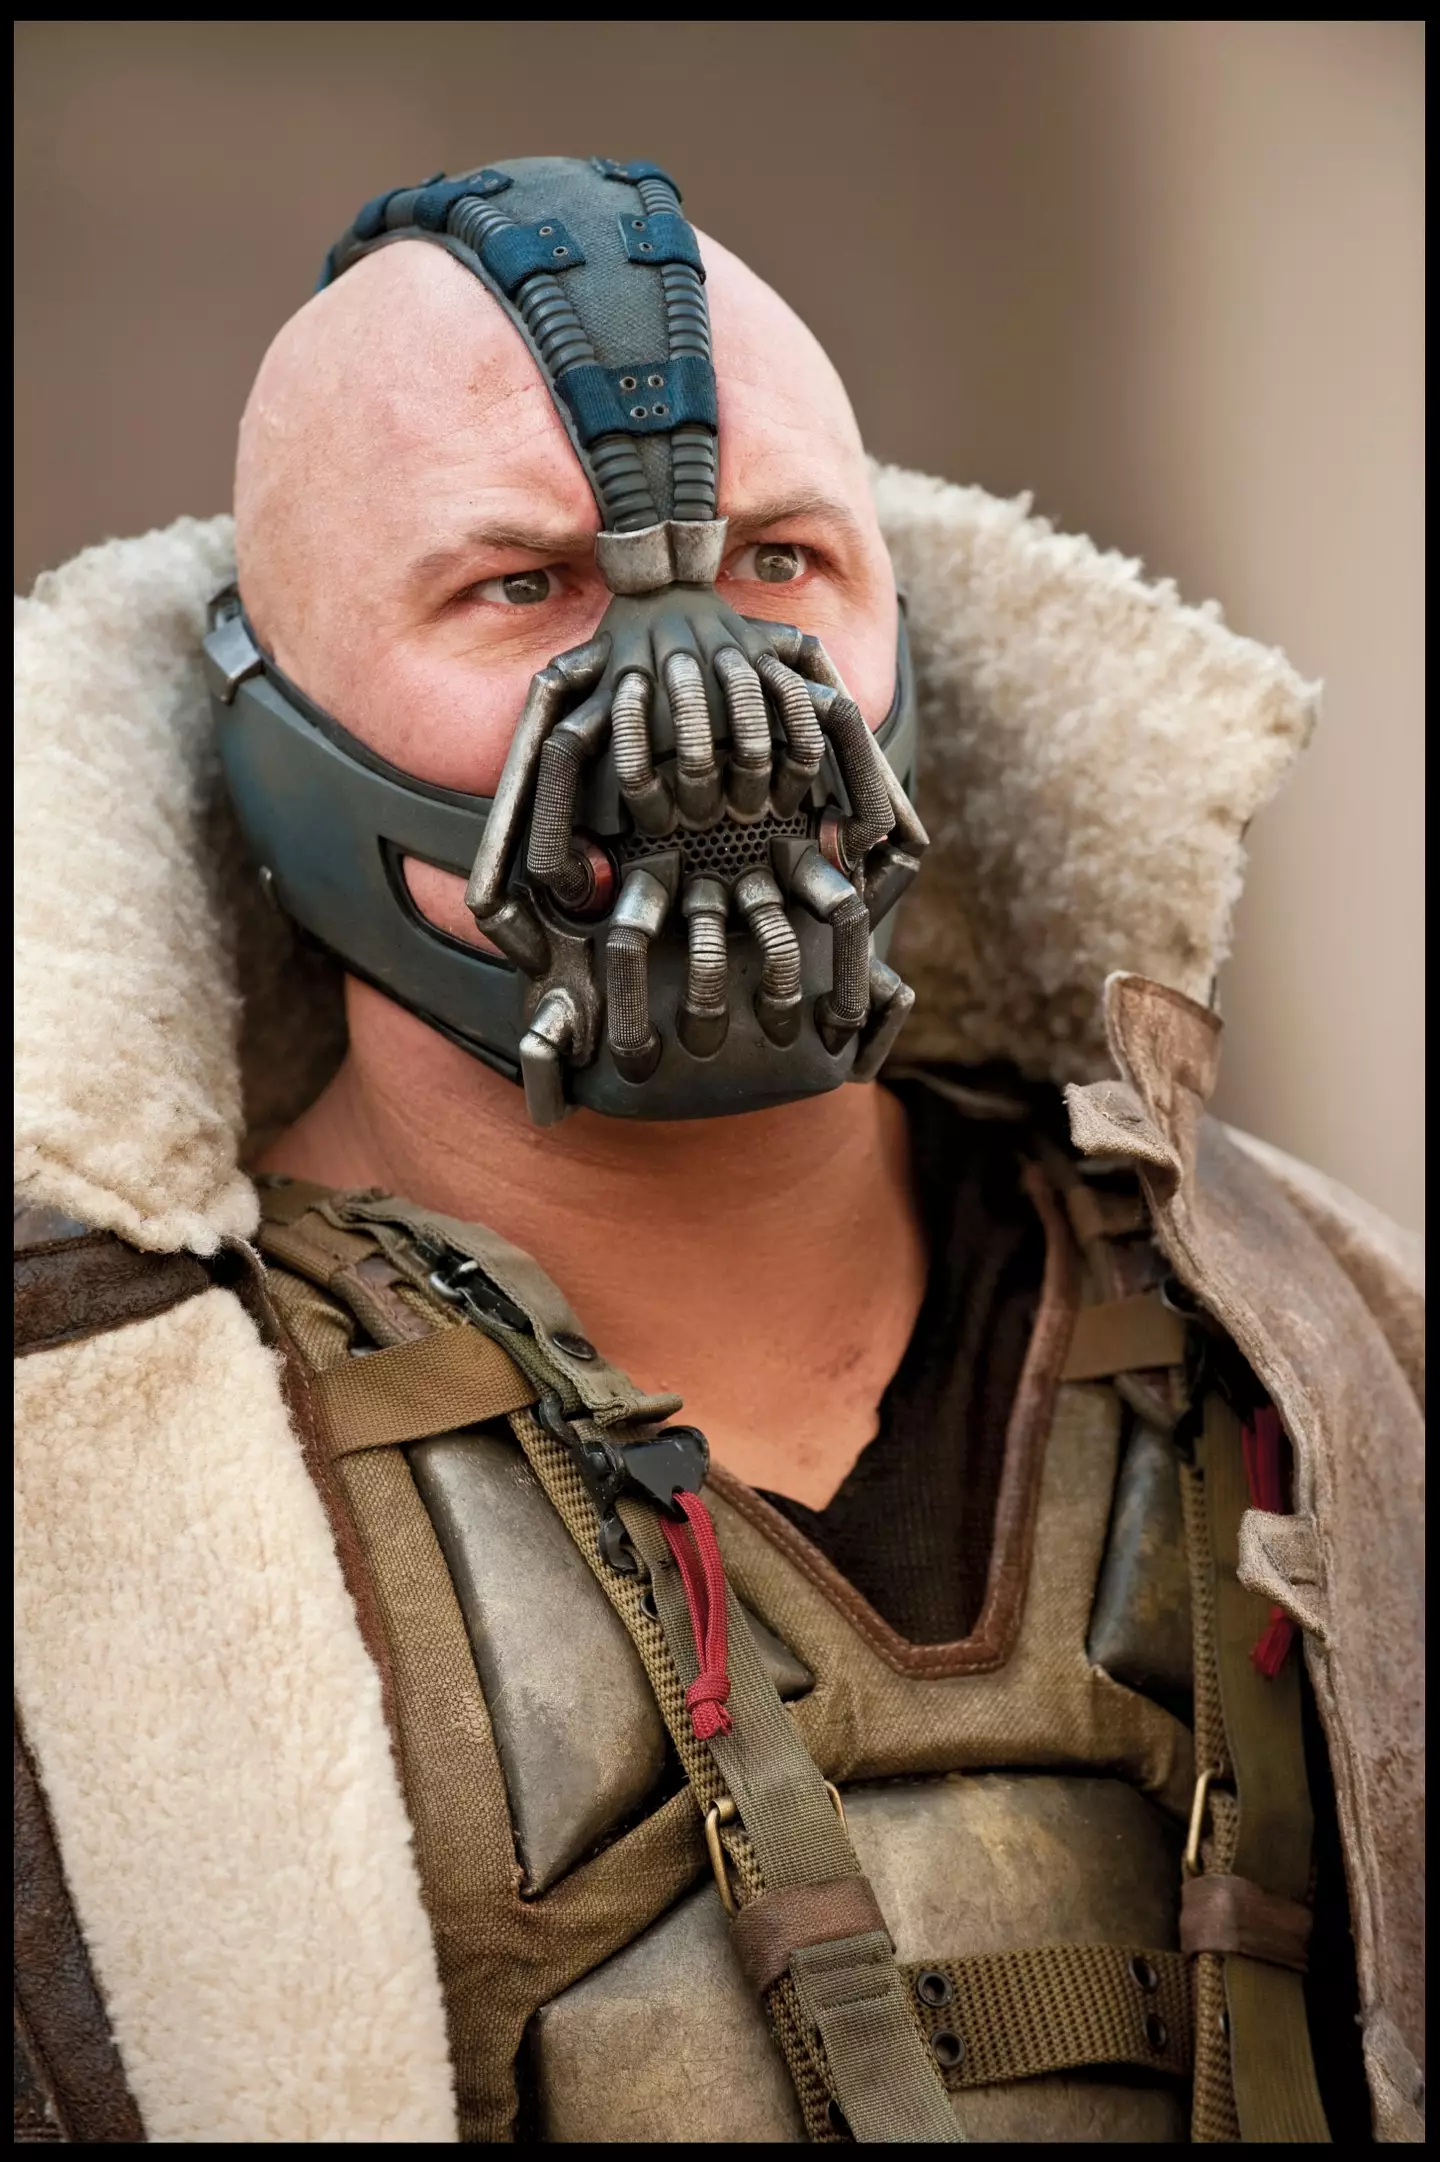 Bane famously wears a terrifying mask in the film.